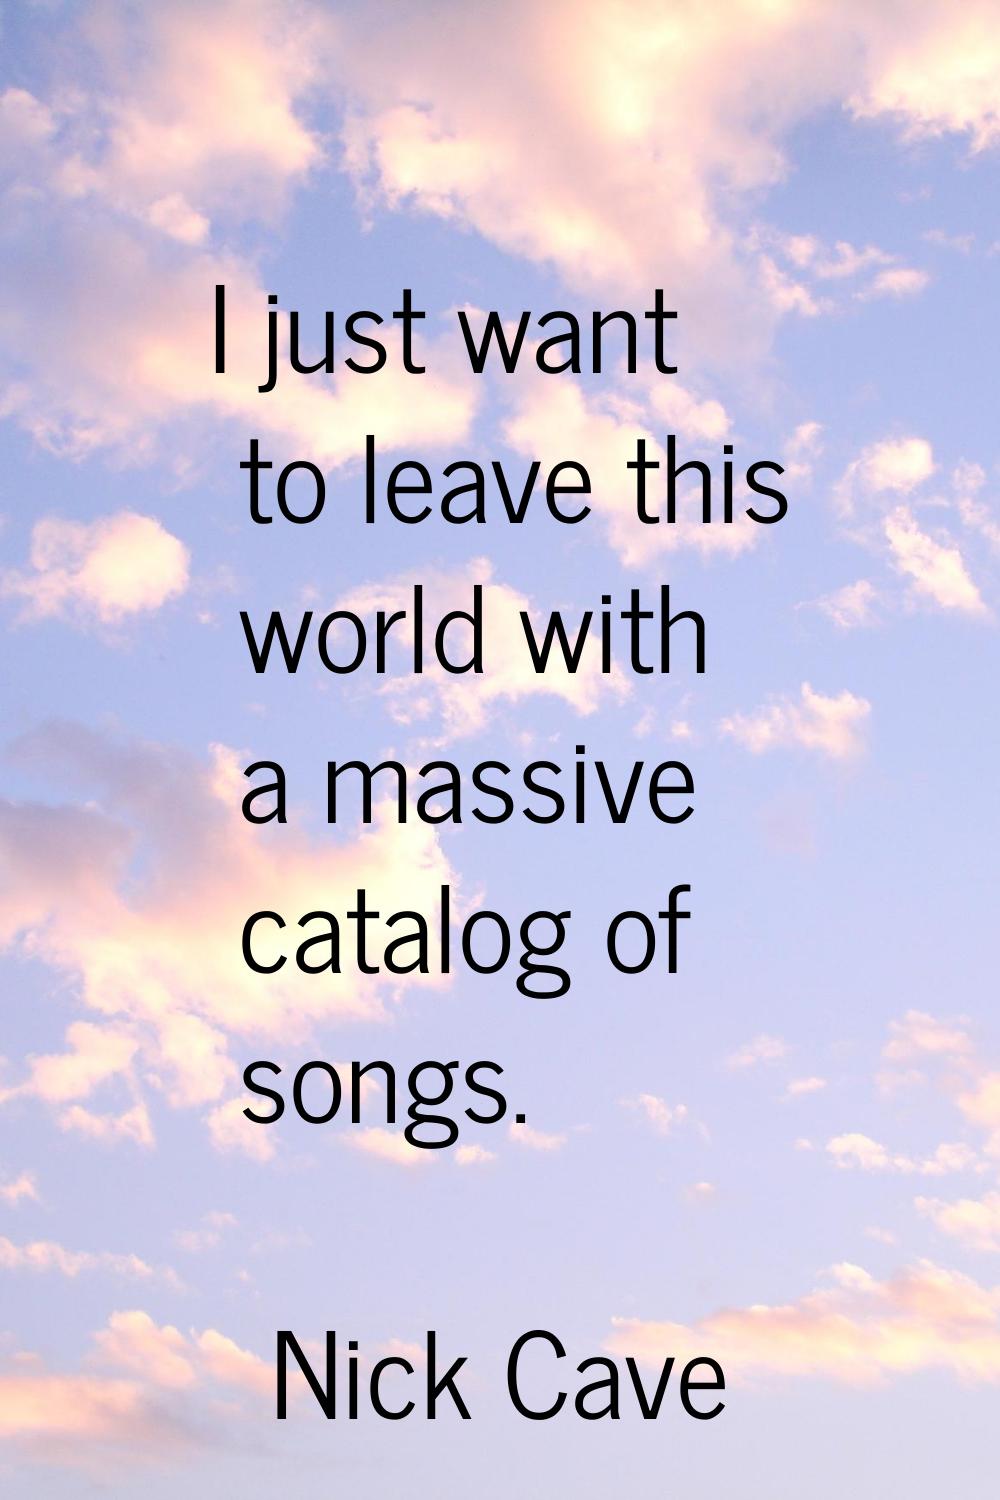 I just want to leave this world with a massive catalog of songs.